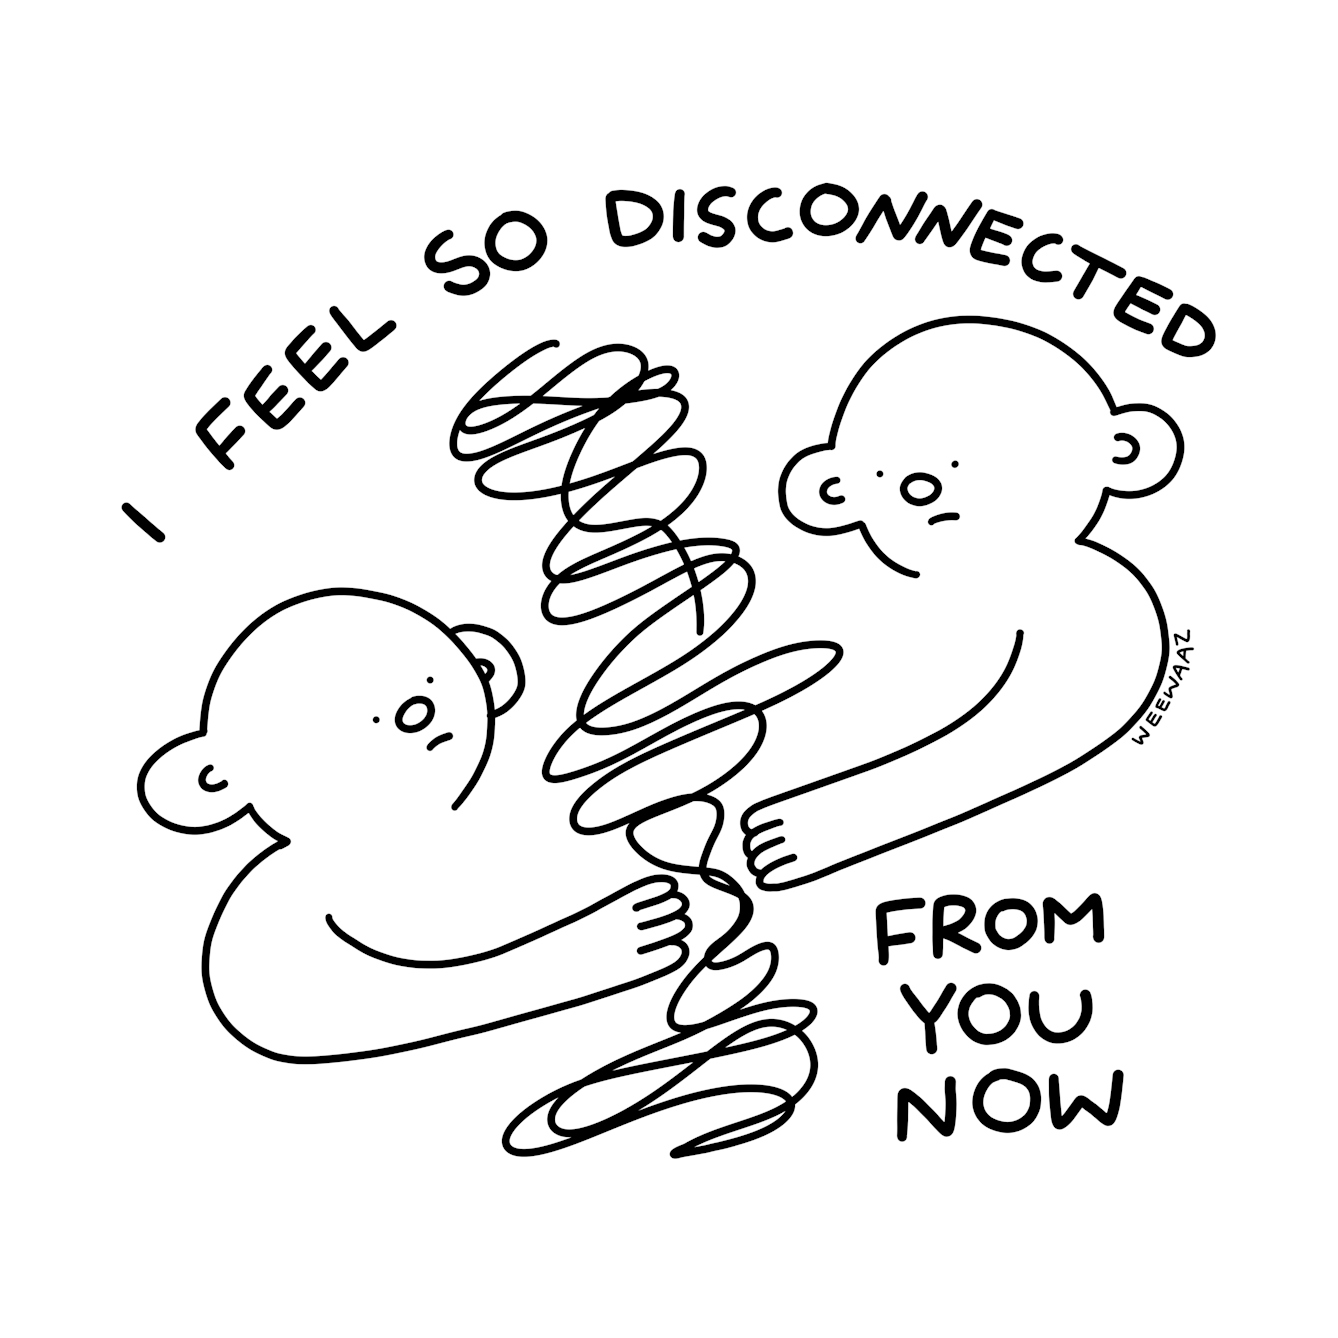 Two cartoon figures hold their hands out towards each other but can’t reach across the divide between them. The accompanying text reads ‘I feel so disconnected from you now’. 